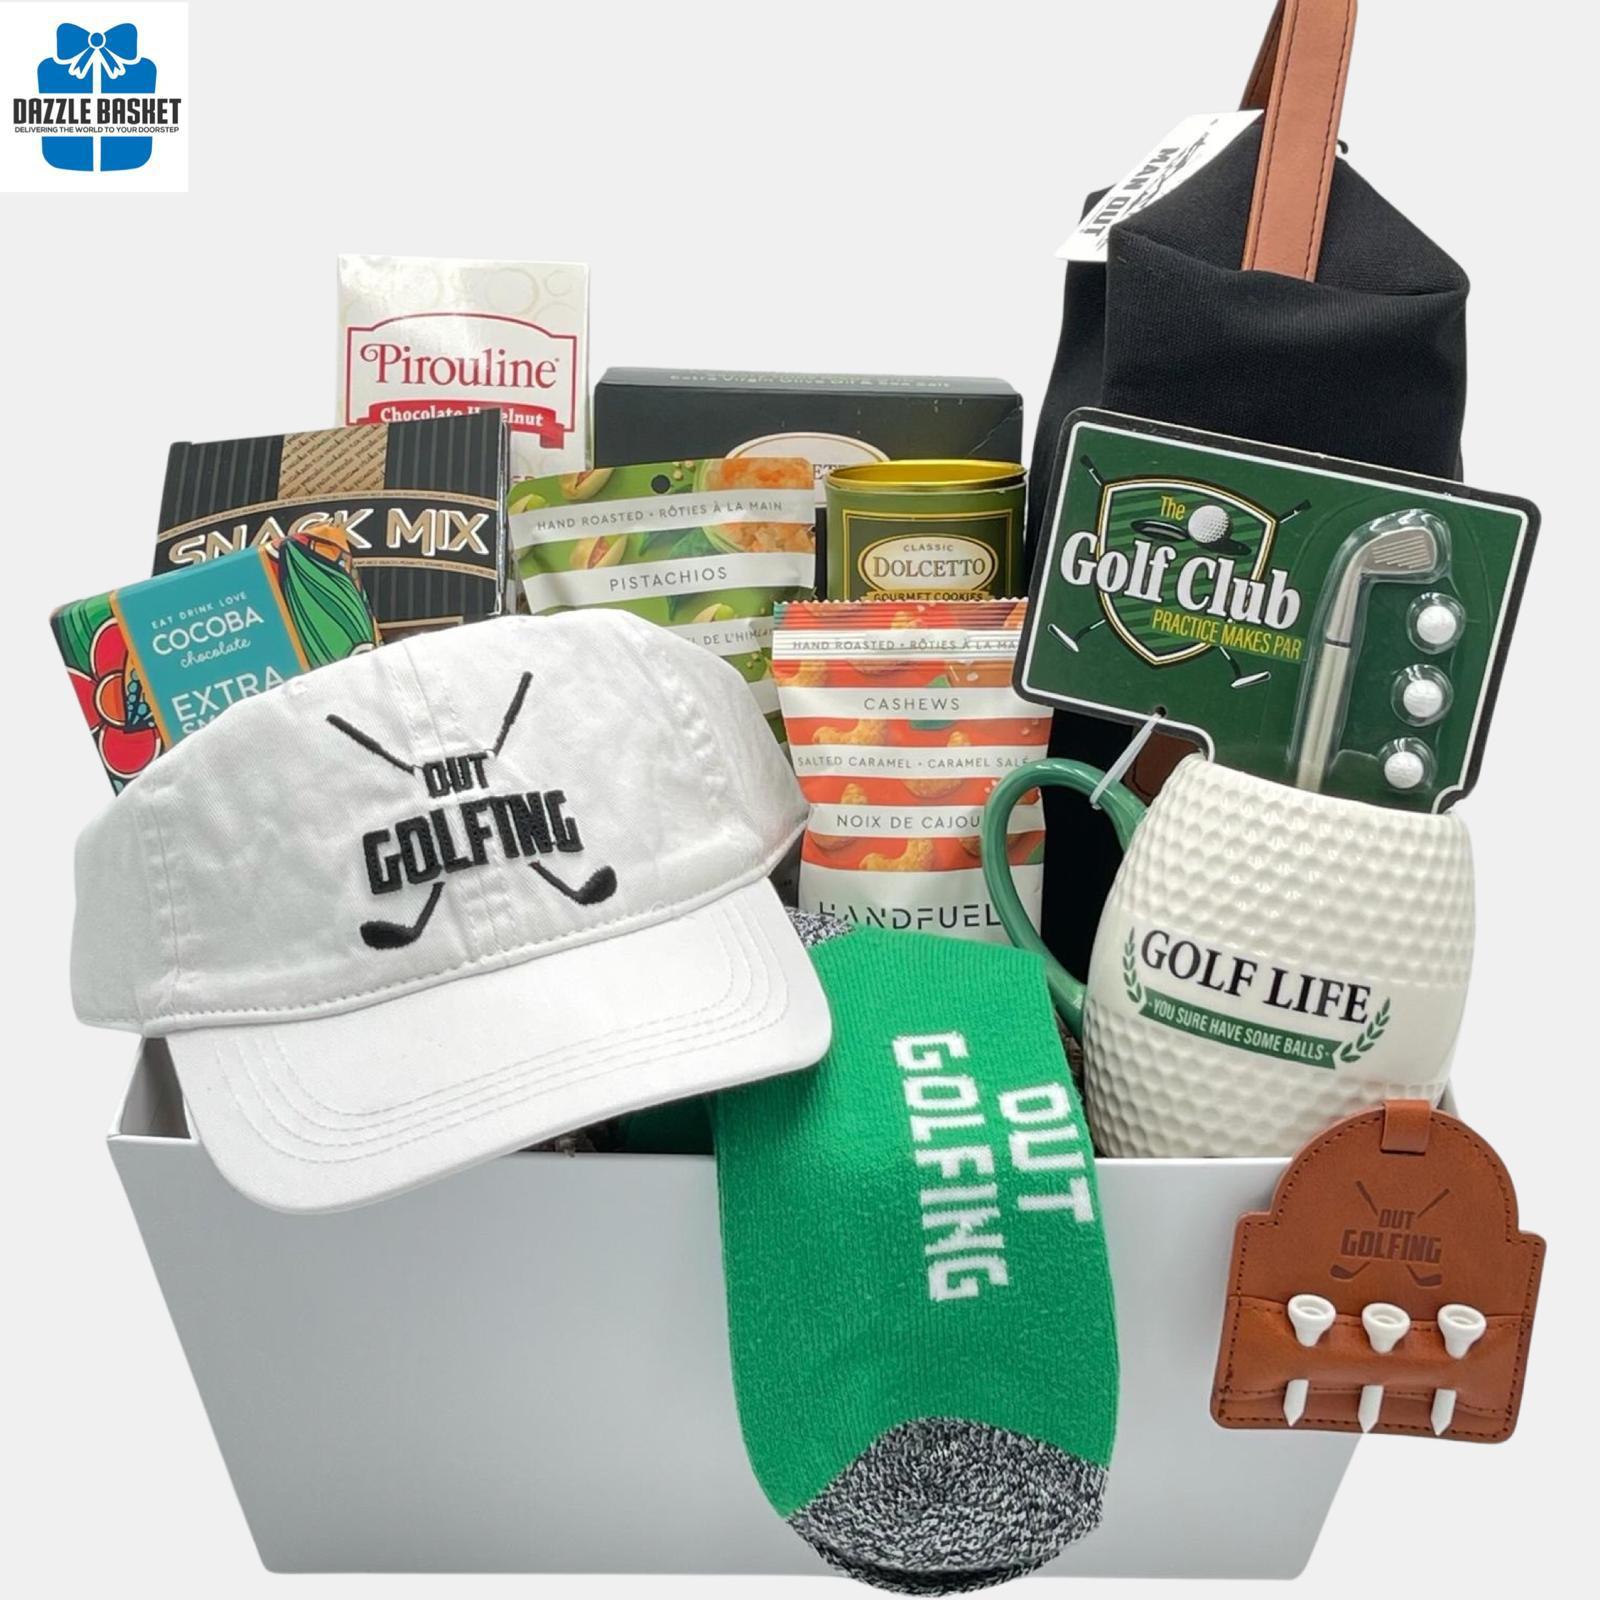 Calgary golf gift basket that includes golf themed products and gourmet snacks in a grey market tray.